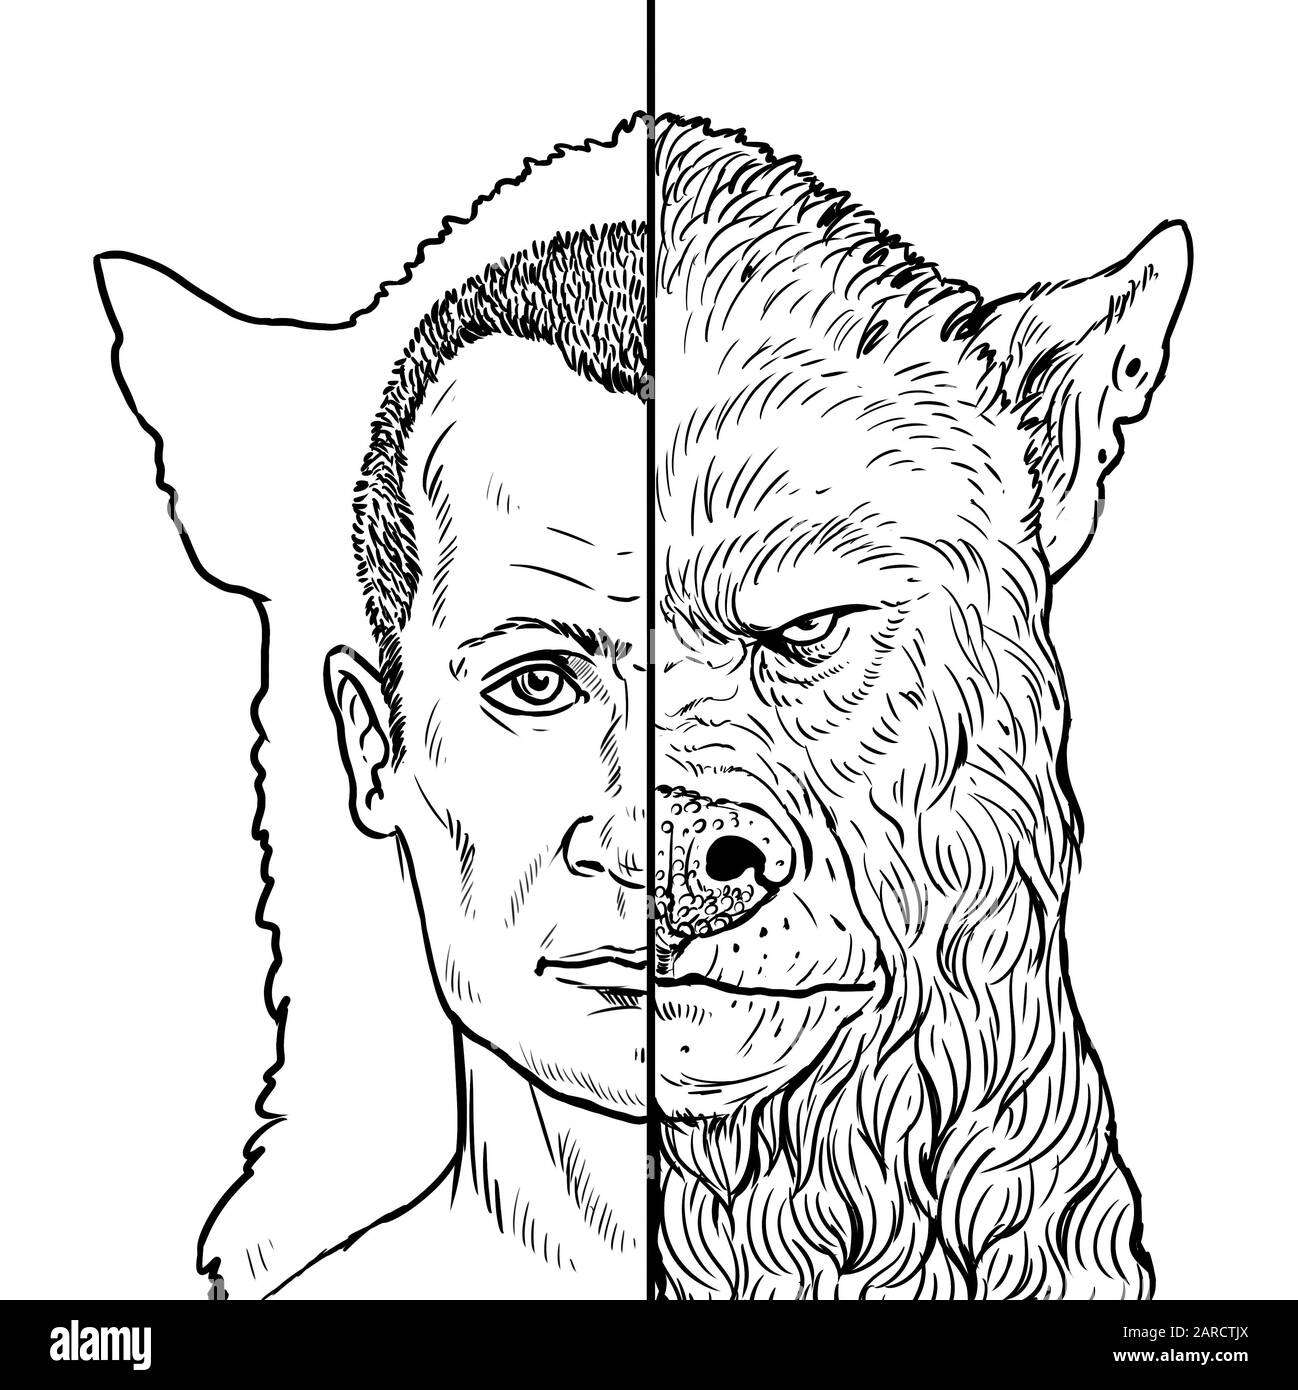 Man turns into a werewolf. Two sides of the soul. Monster silhouette illustration. Stock Photo